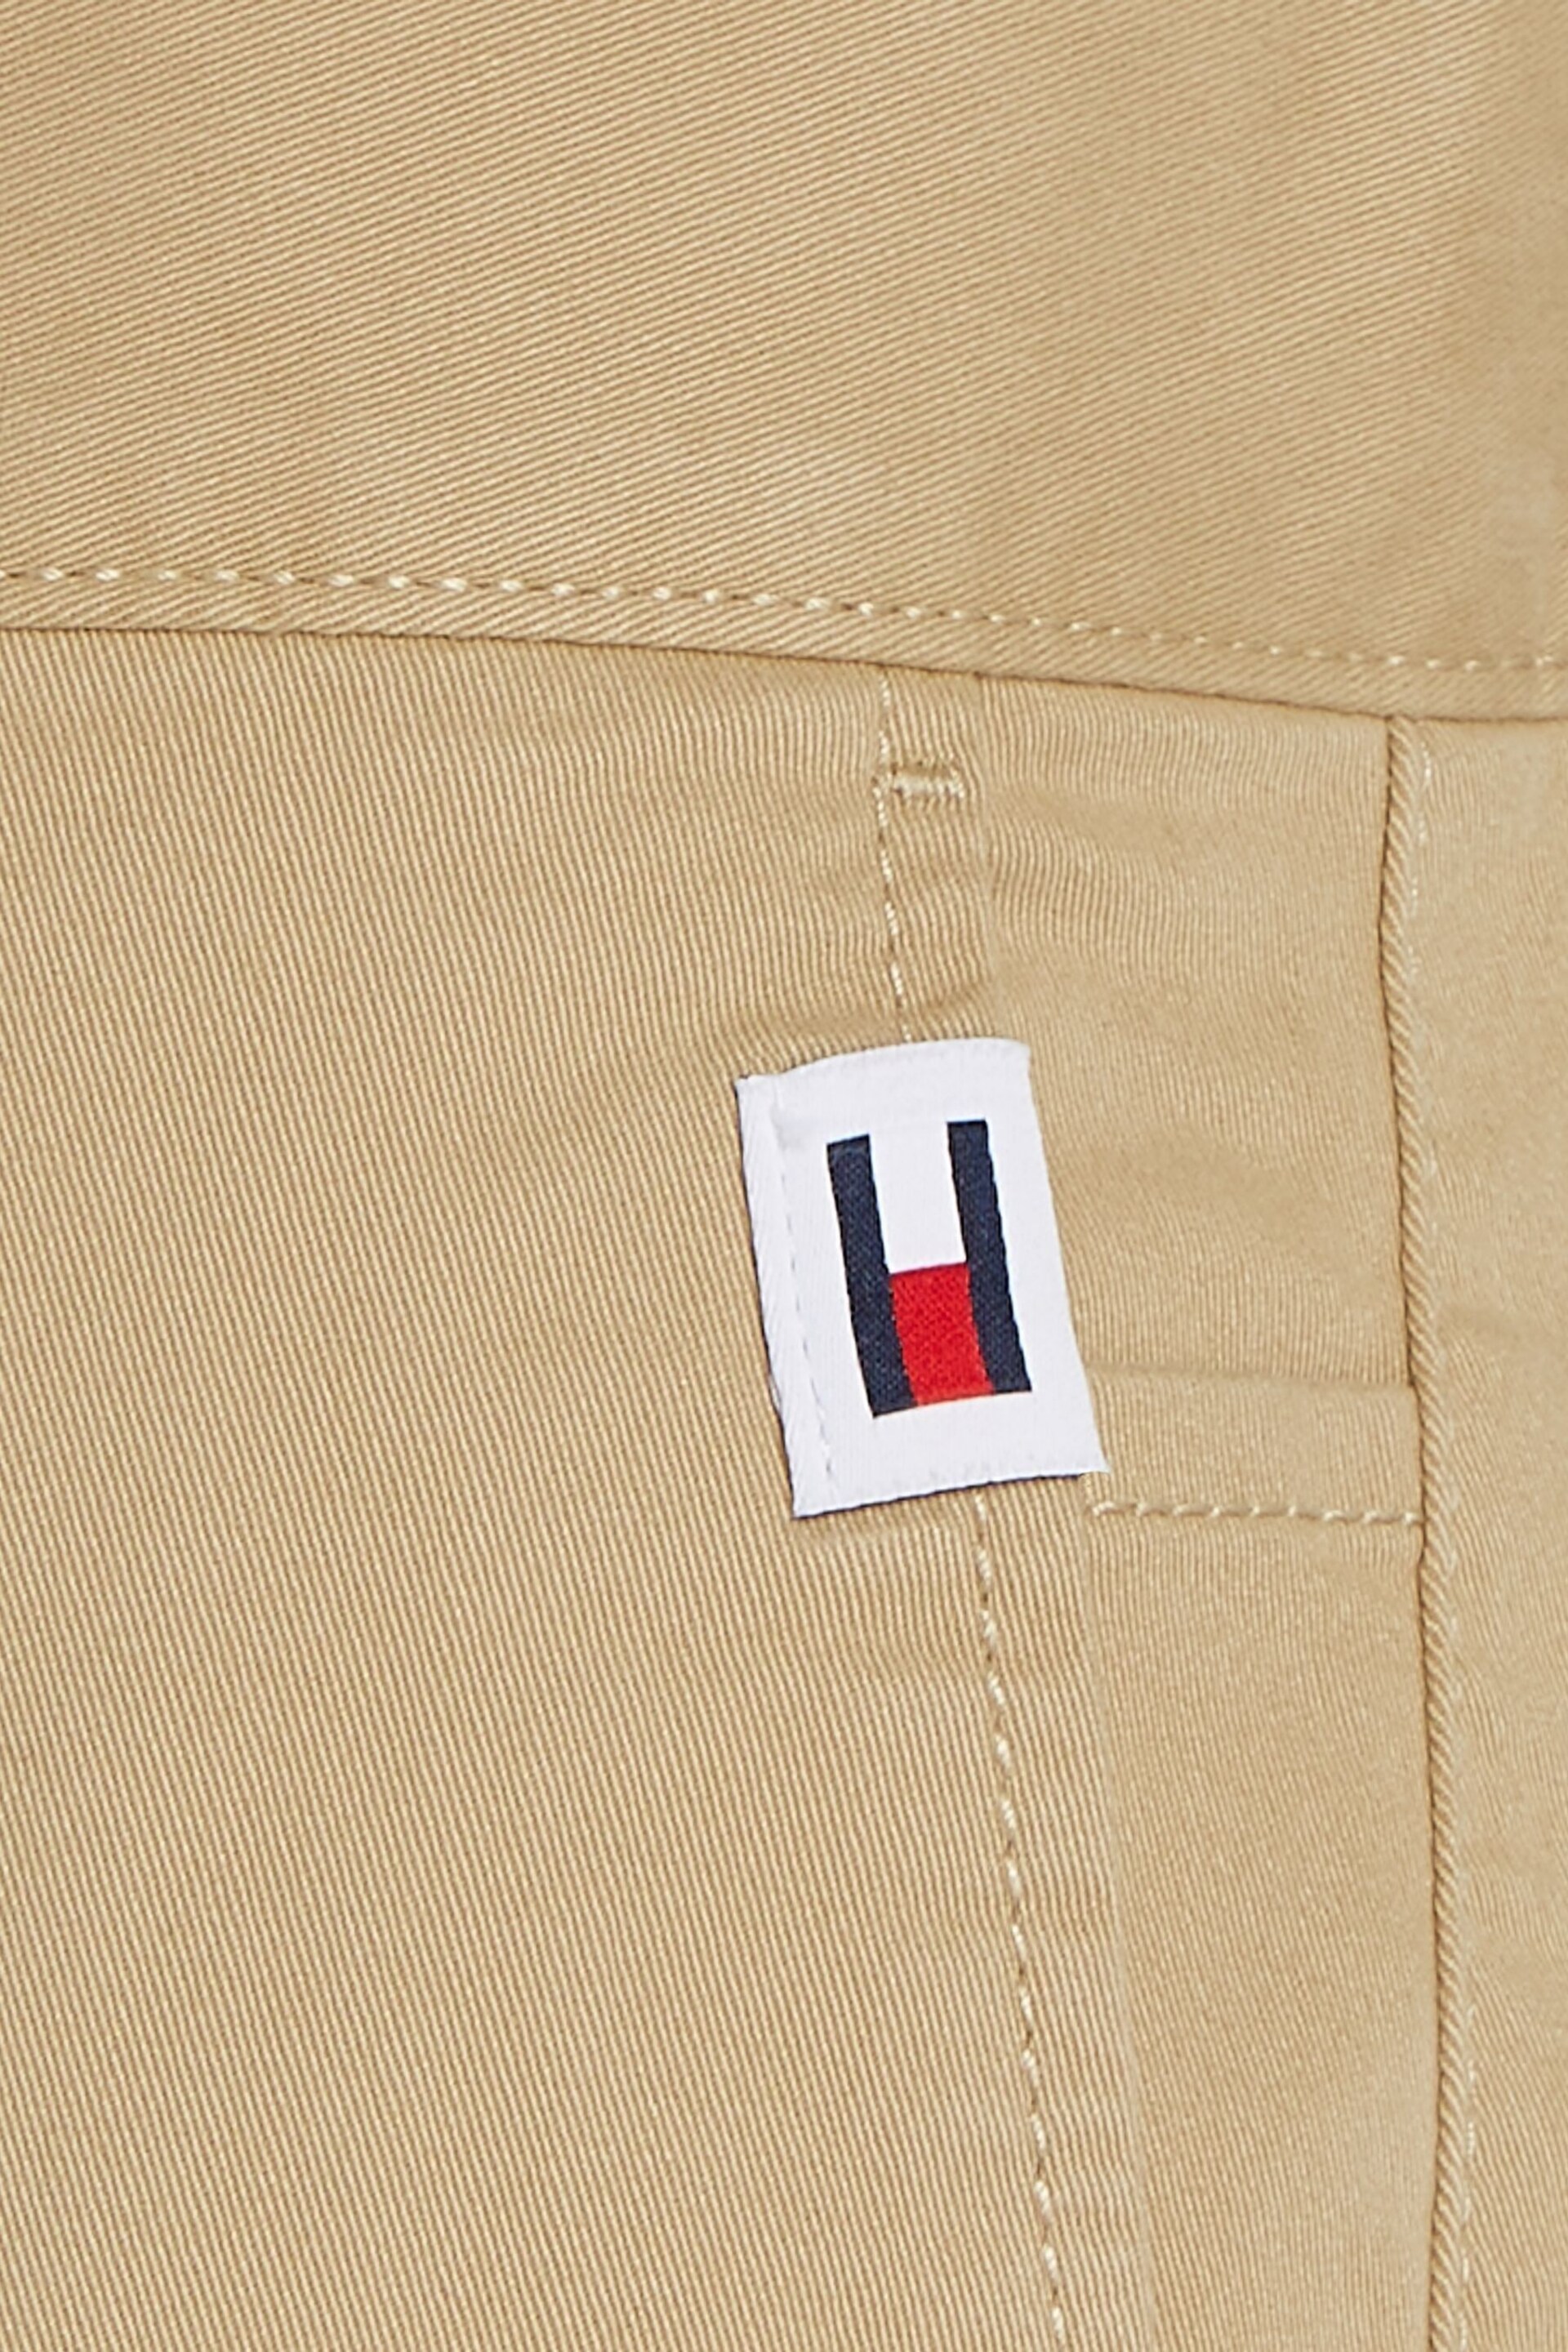 Tommy Jeans Scanton Shorts - Image 6 of 6